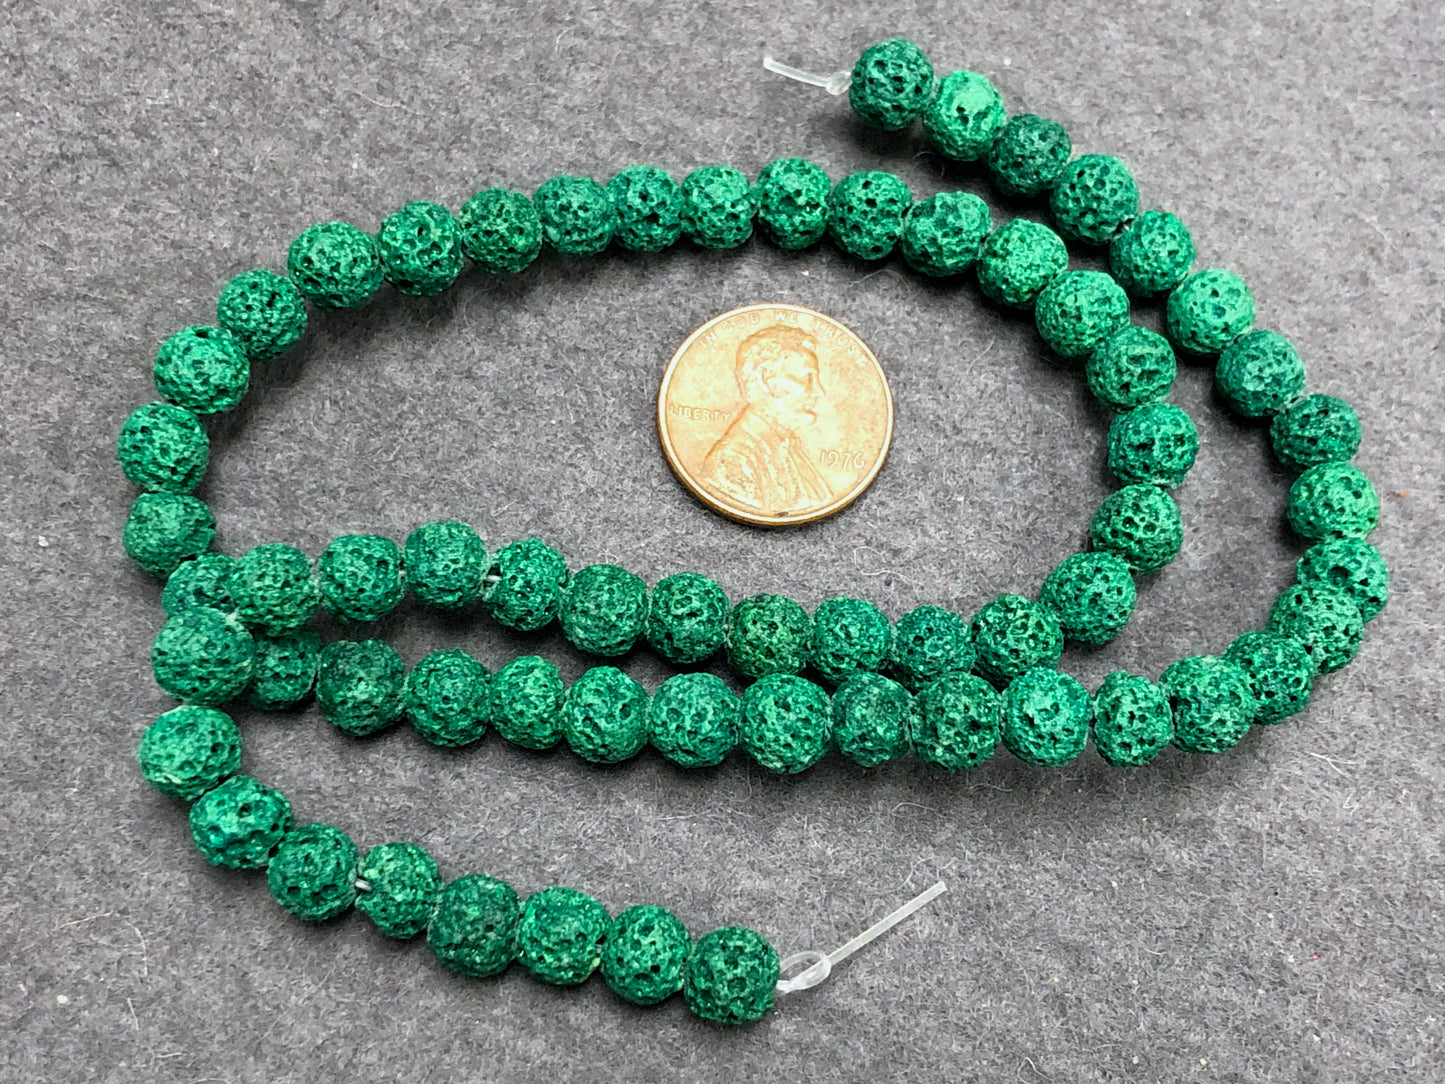 Green (dyed) Lava 6-7mm Round Beads